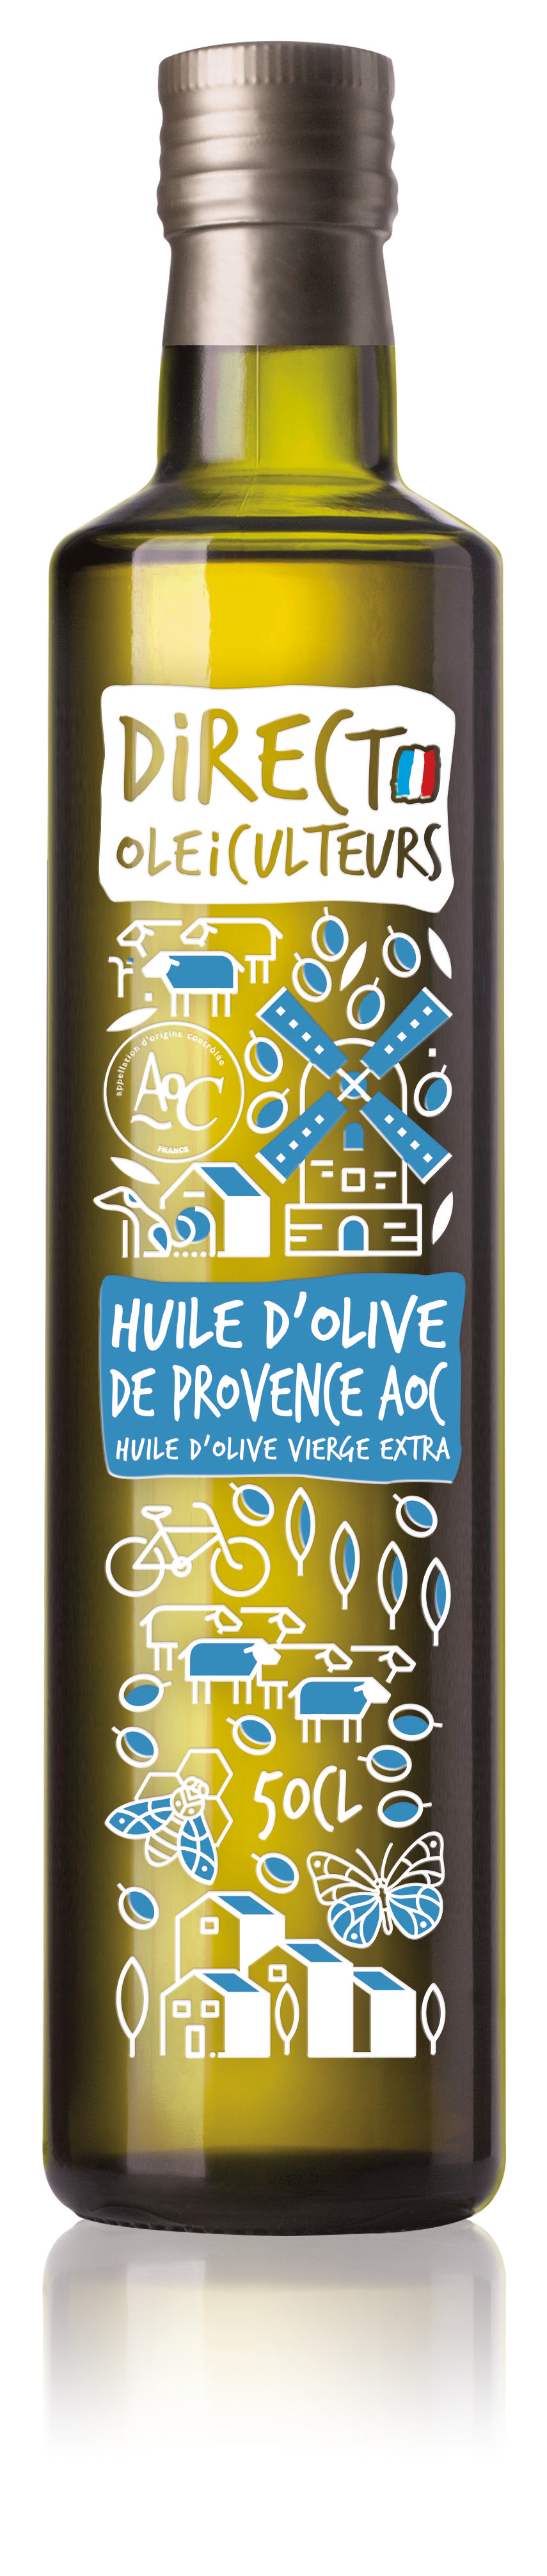 DIRECT_OLEICULTEUR_PROVENCE